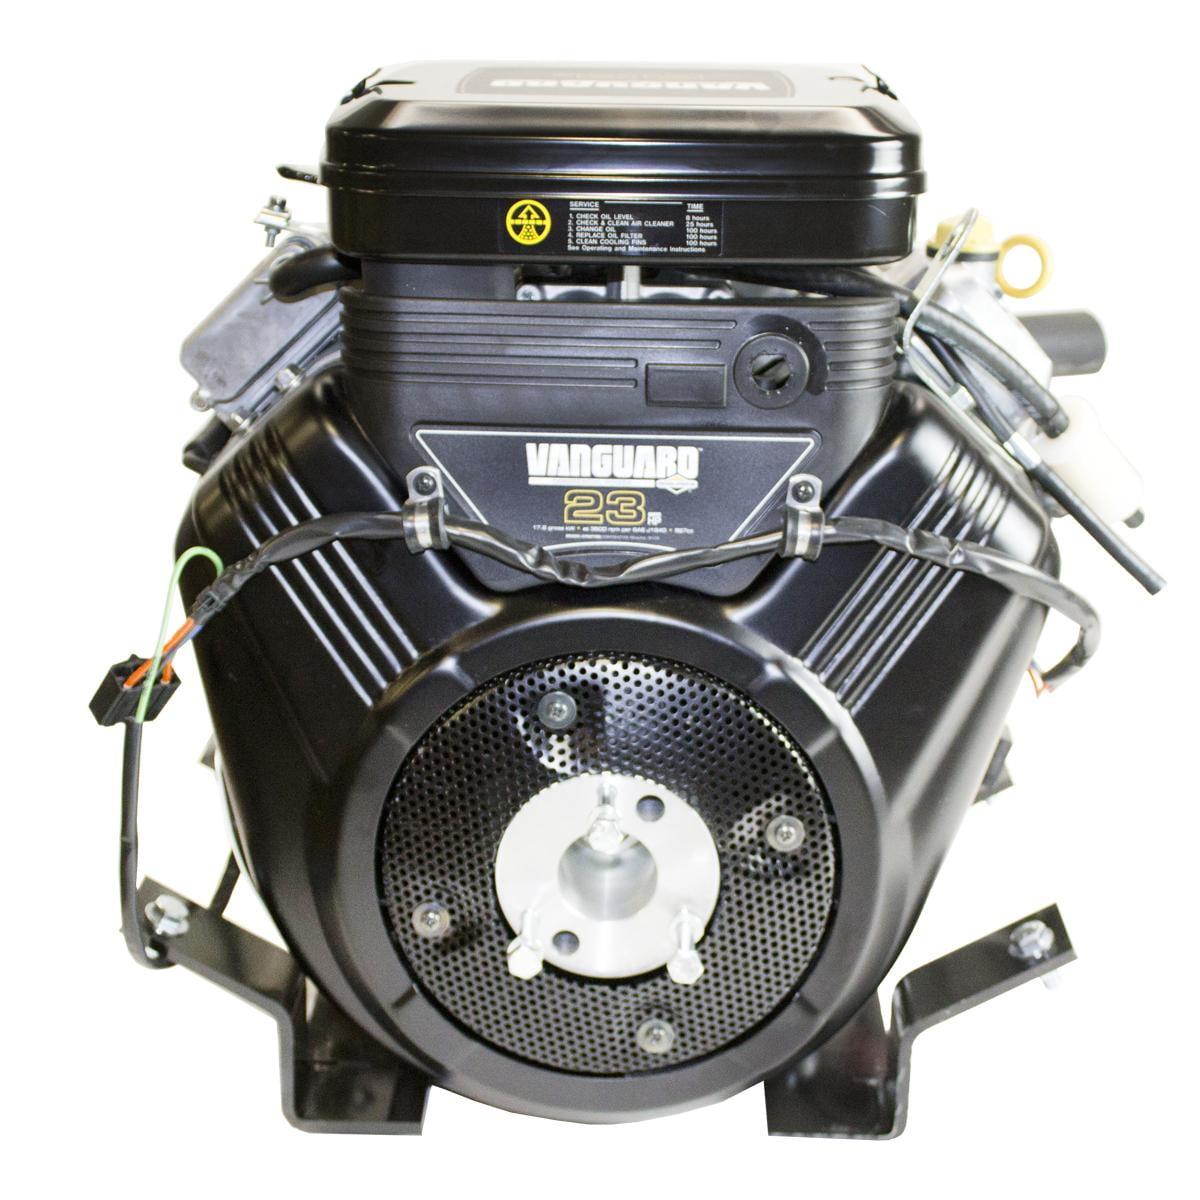 23hp Vanguard with kit to fit into a carbureted JD425 with Kawasaki FD620D, Briggs & Stratton - Walmart.com